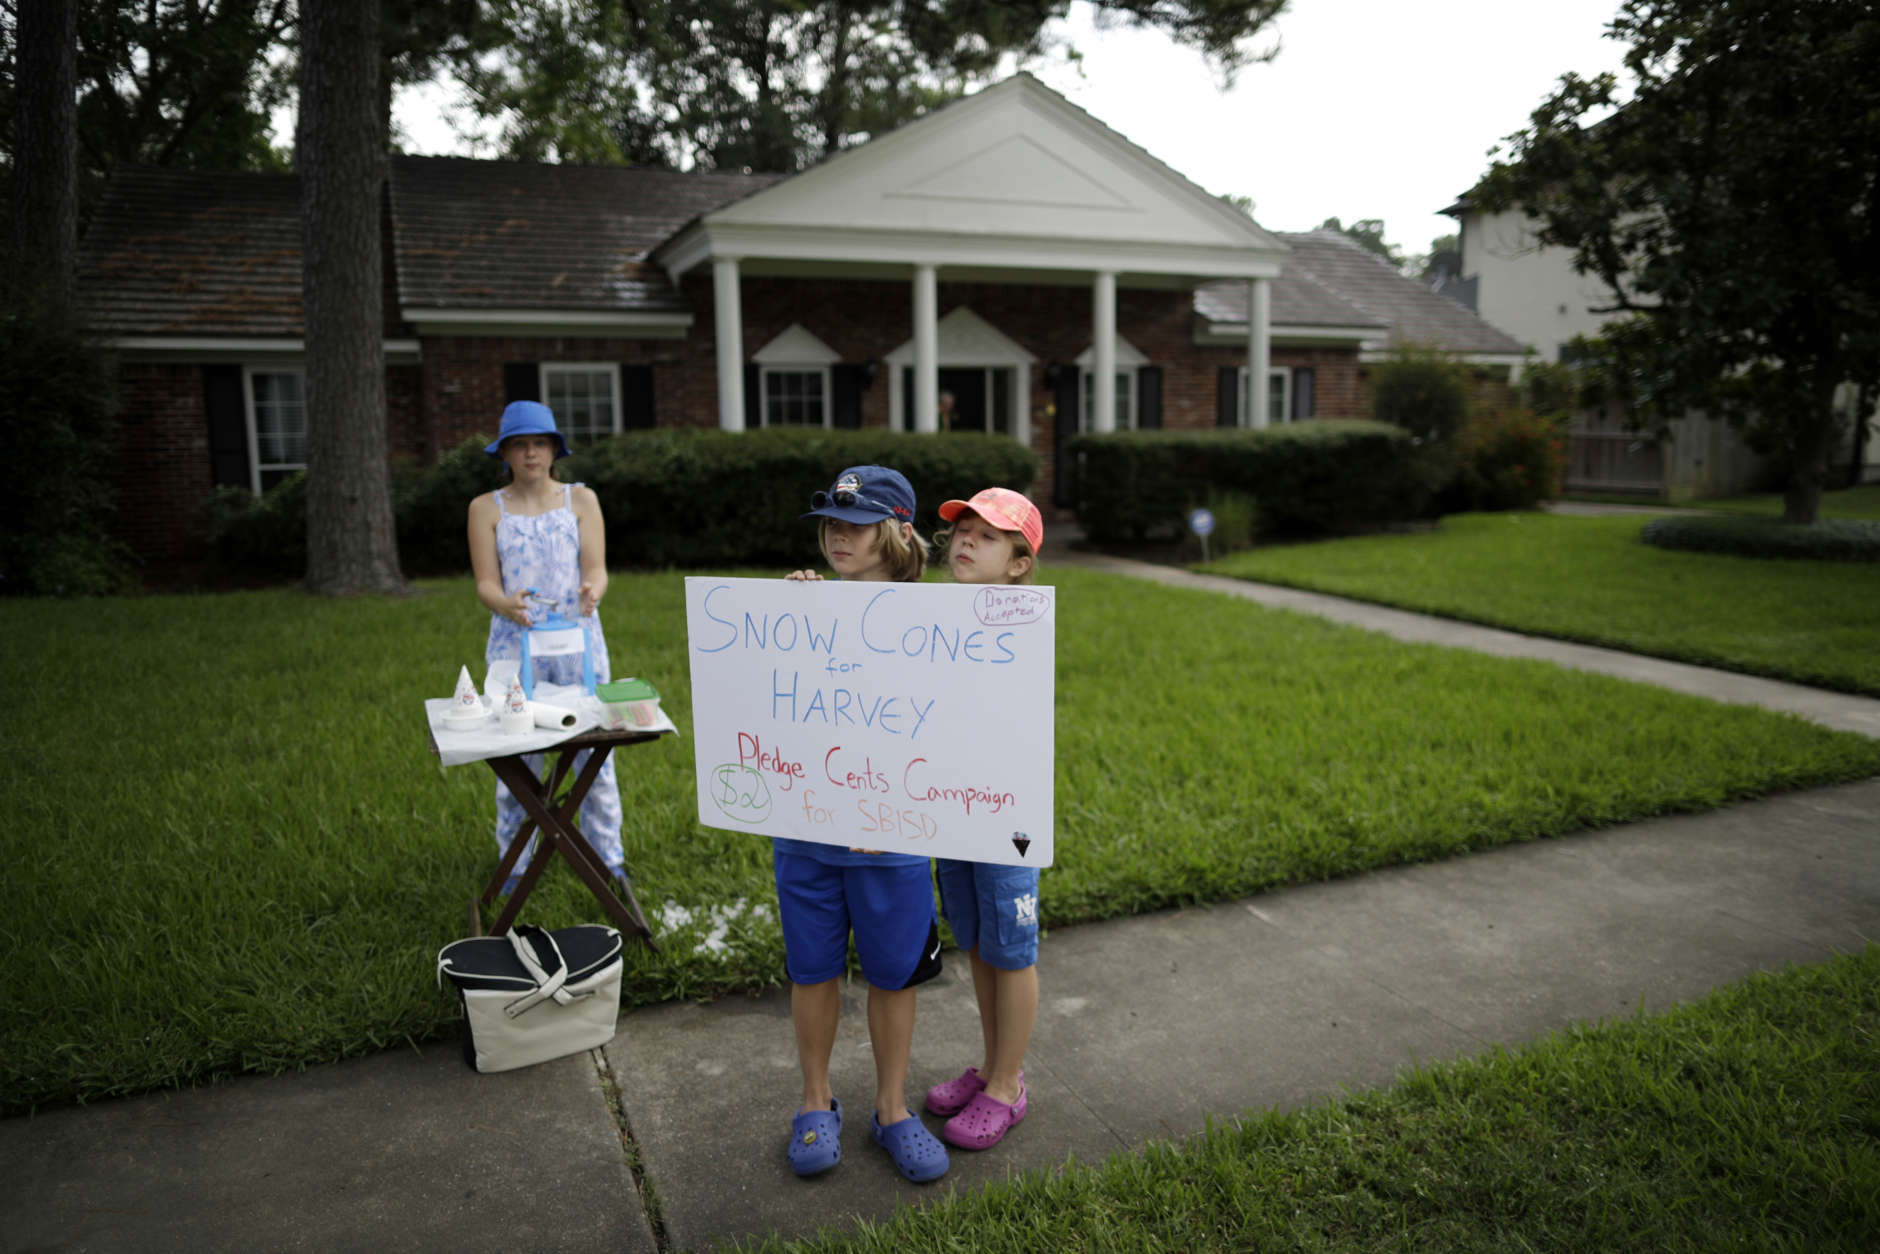 Leonard Olschimke, center, holds a sign offering snow cones as he stands in front of his house with sisters Sarah, right, and Lily, left, Friday, Sept. 1, 2017, in Houston. Thousands of people have been displaced by torrential rains and catastrophic flooding since Harvey slammed into Southeast Texas last Friday. (AP Photo/Gregory Bull)